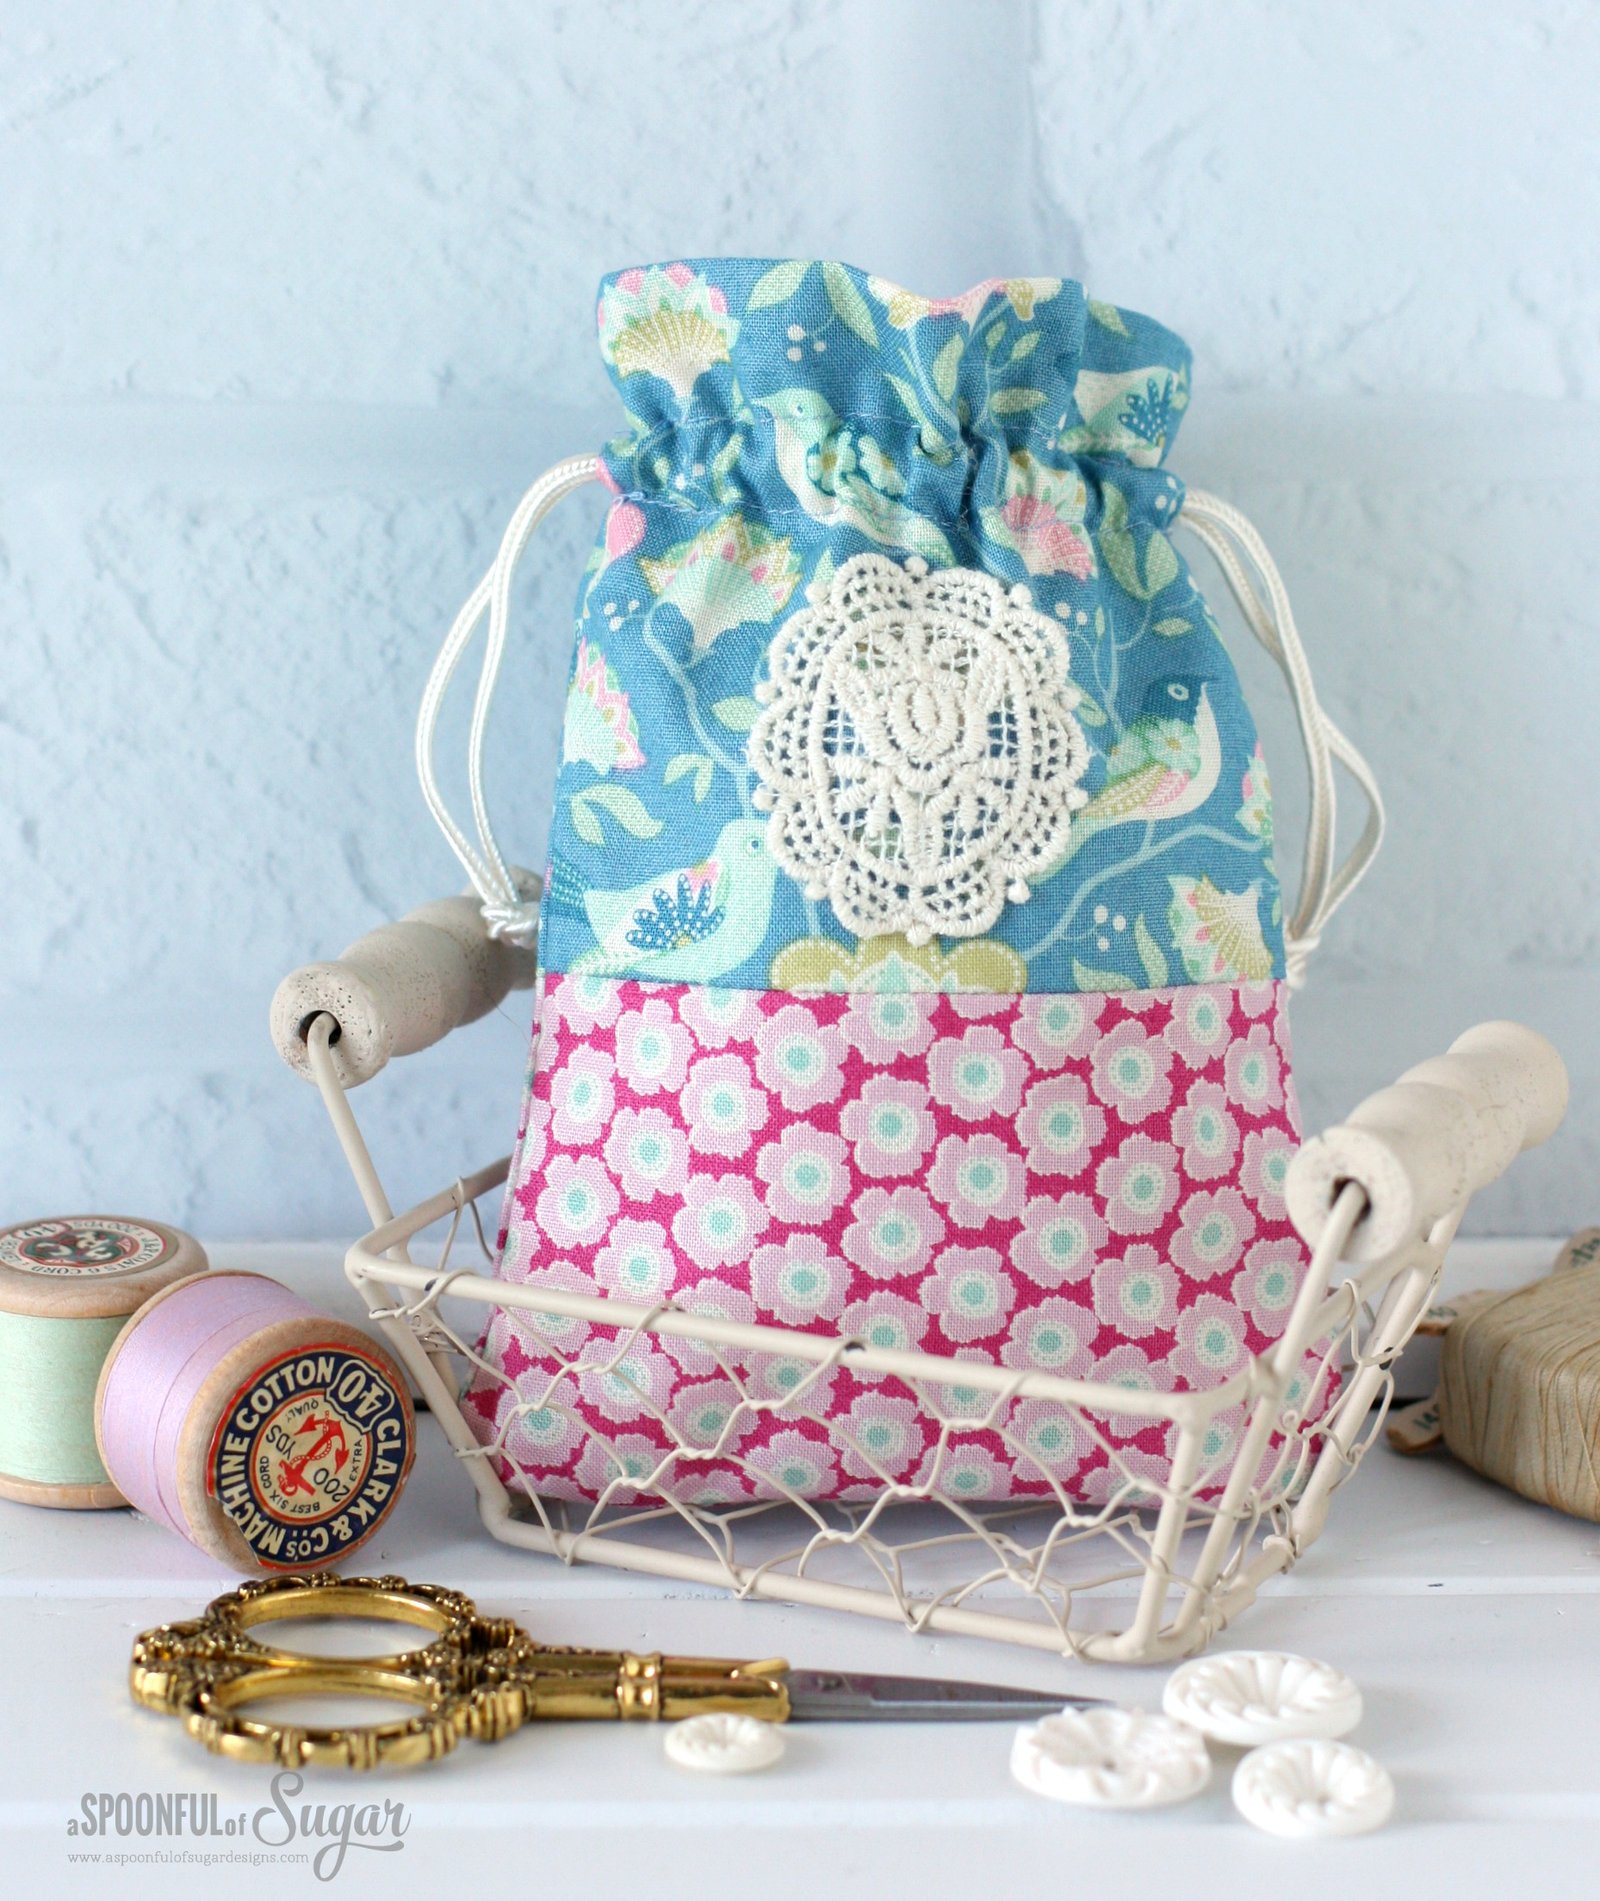 Harvest Drawstring Bags - free sewing tutorial by A Spoonful of Sugar